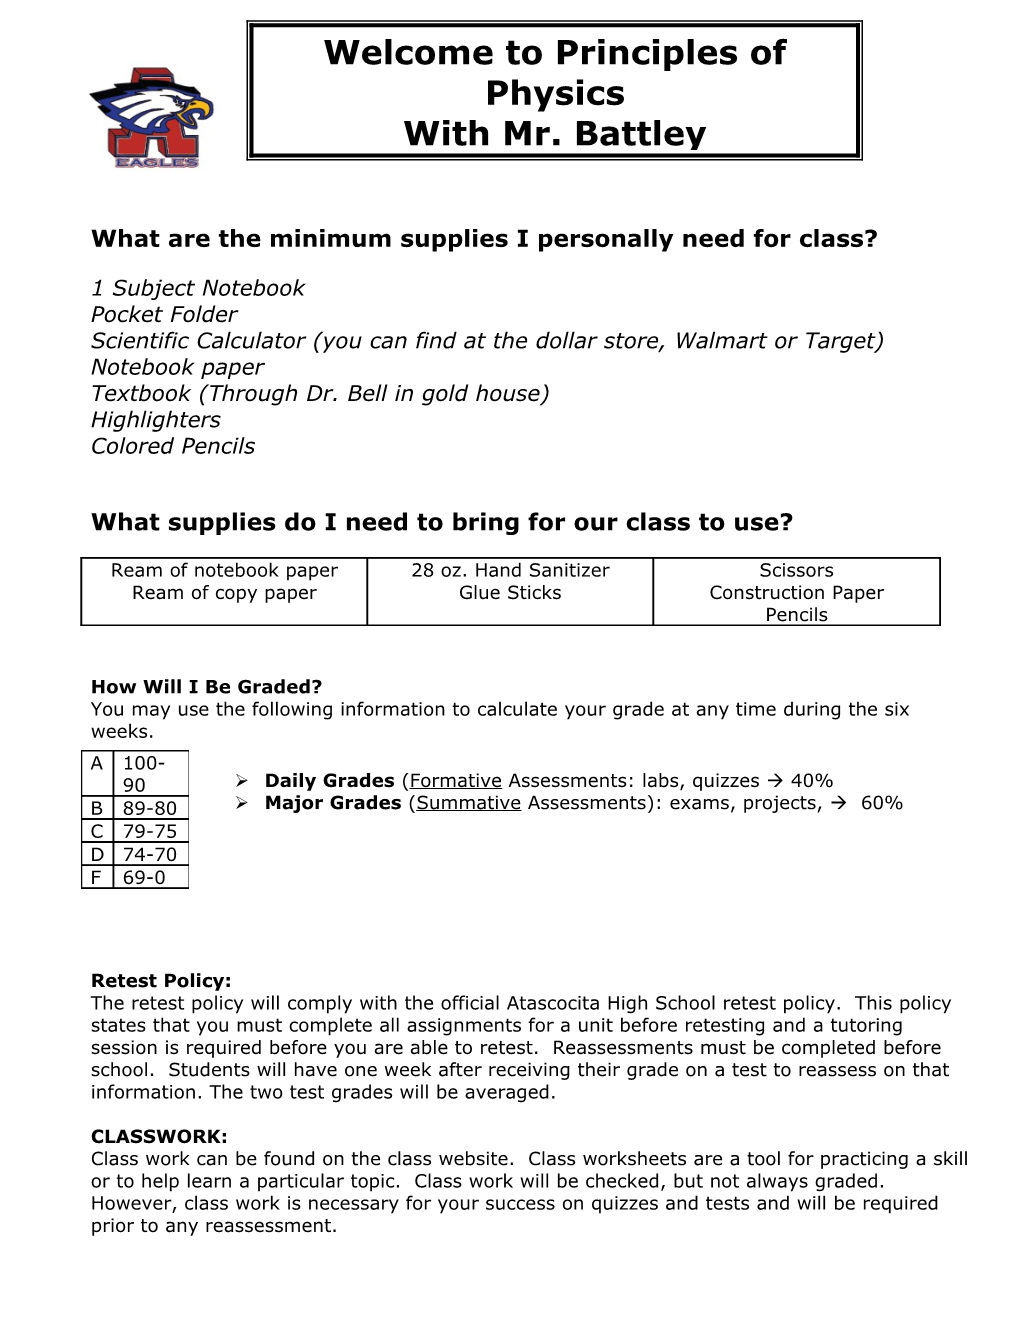 What Are the Minimum Supplies I Personally Need for Class?